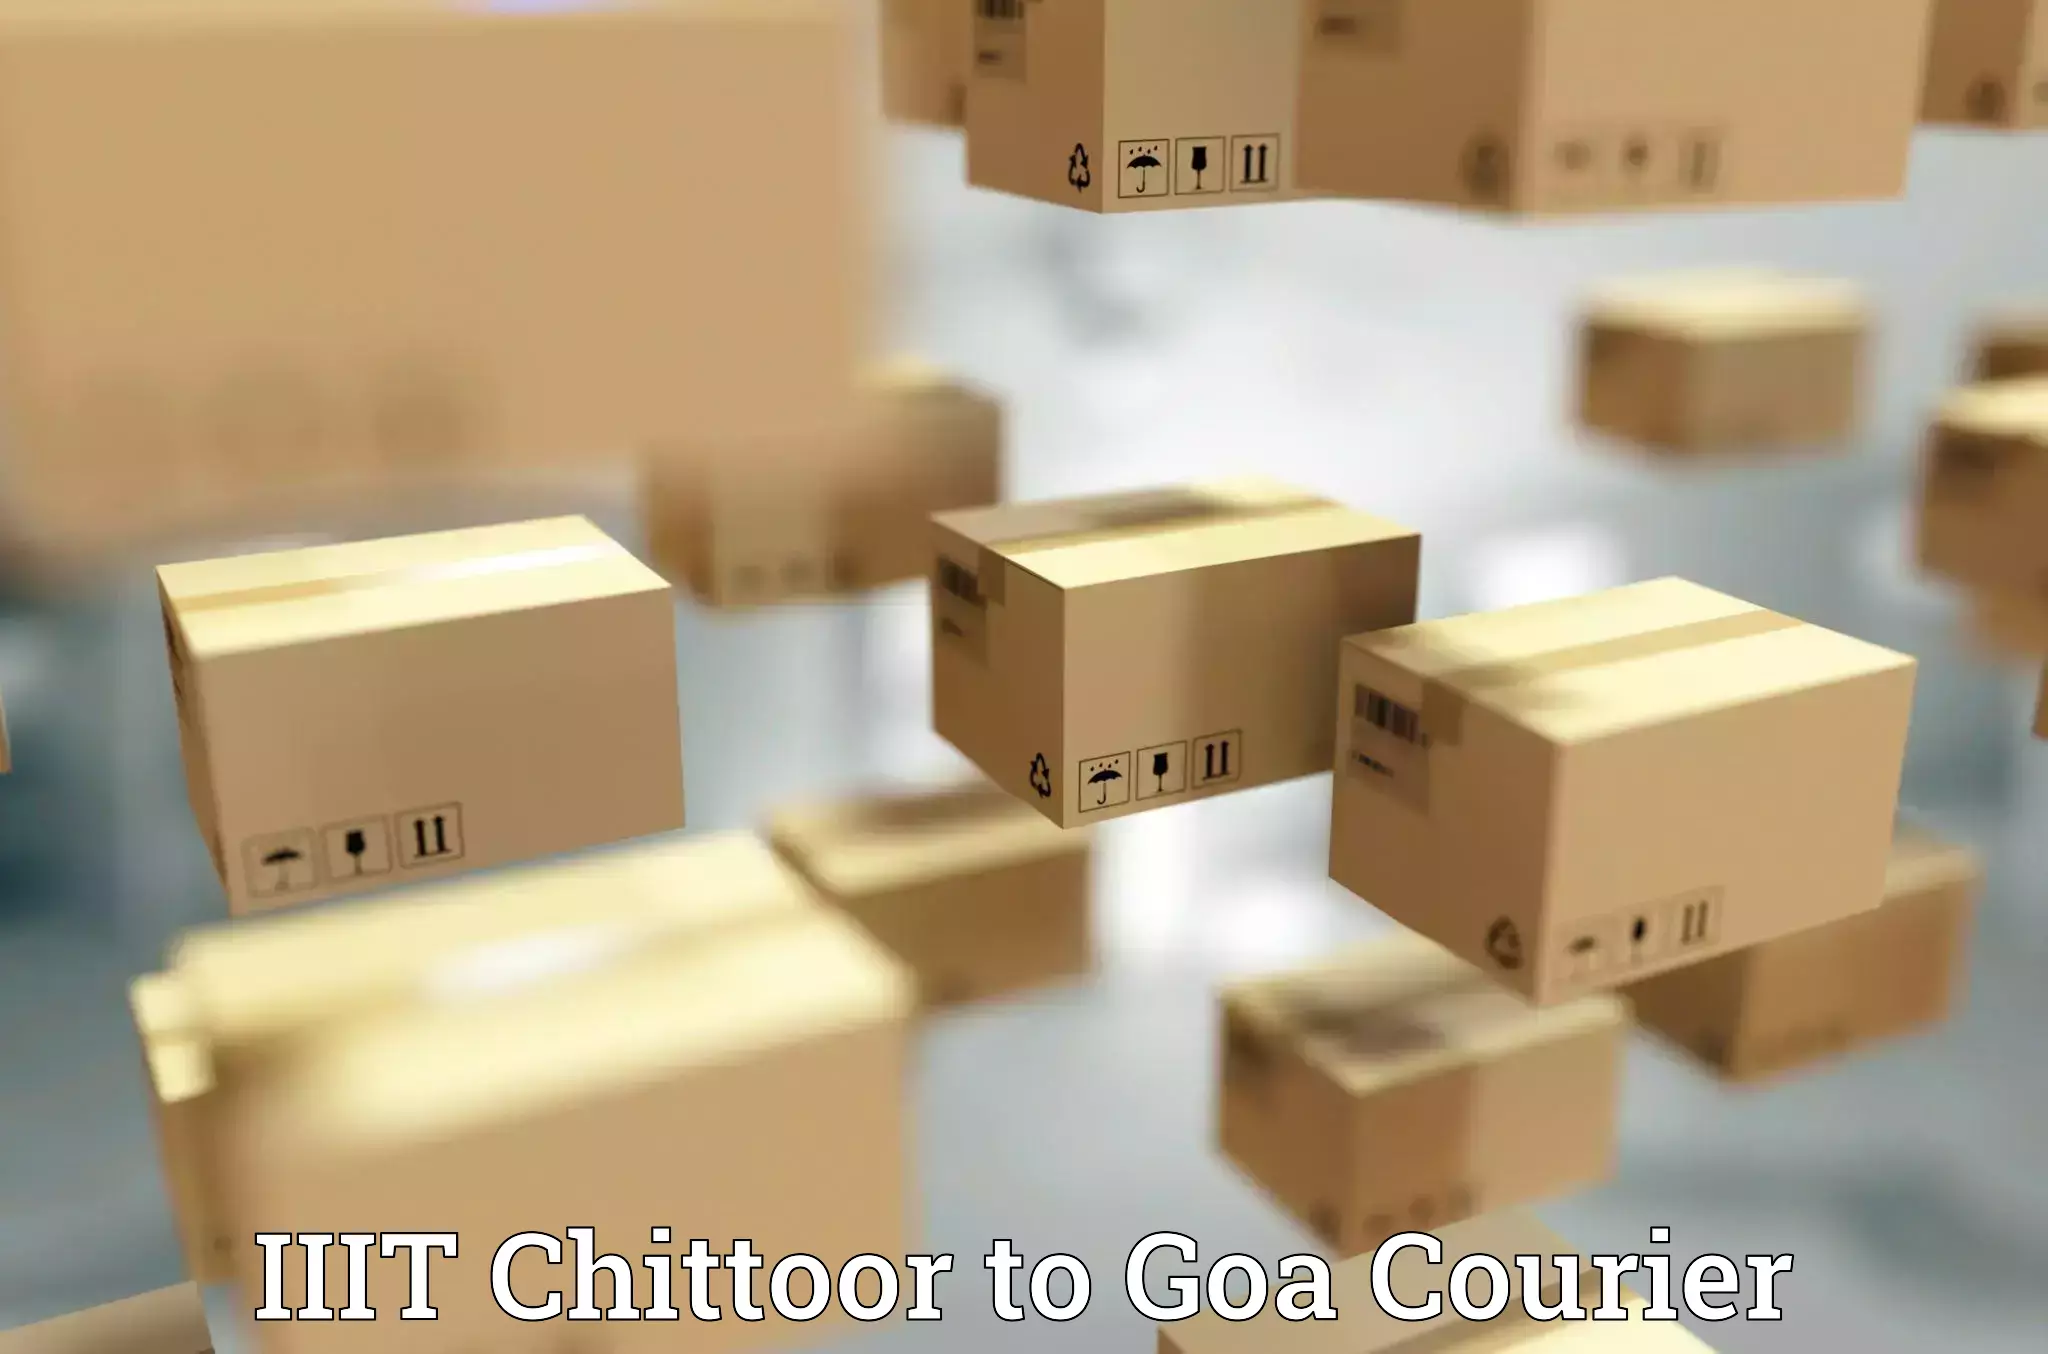 Postal and courier services IIIT Chittoor to IIT Goa